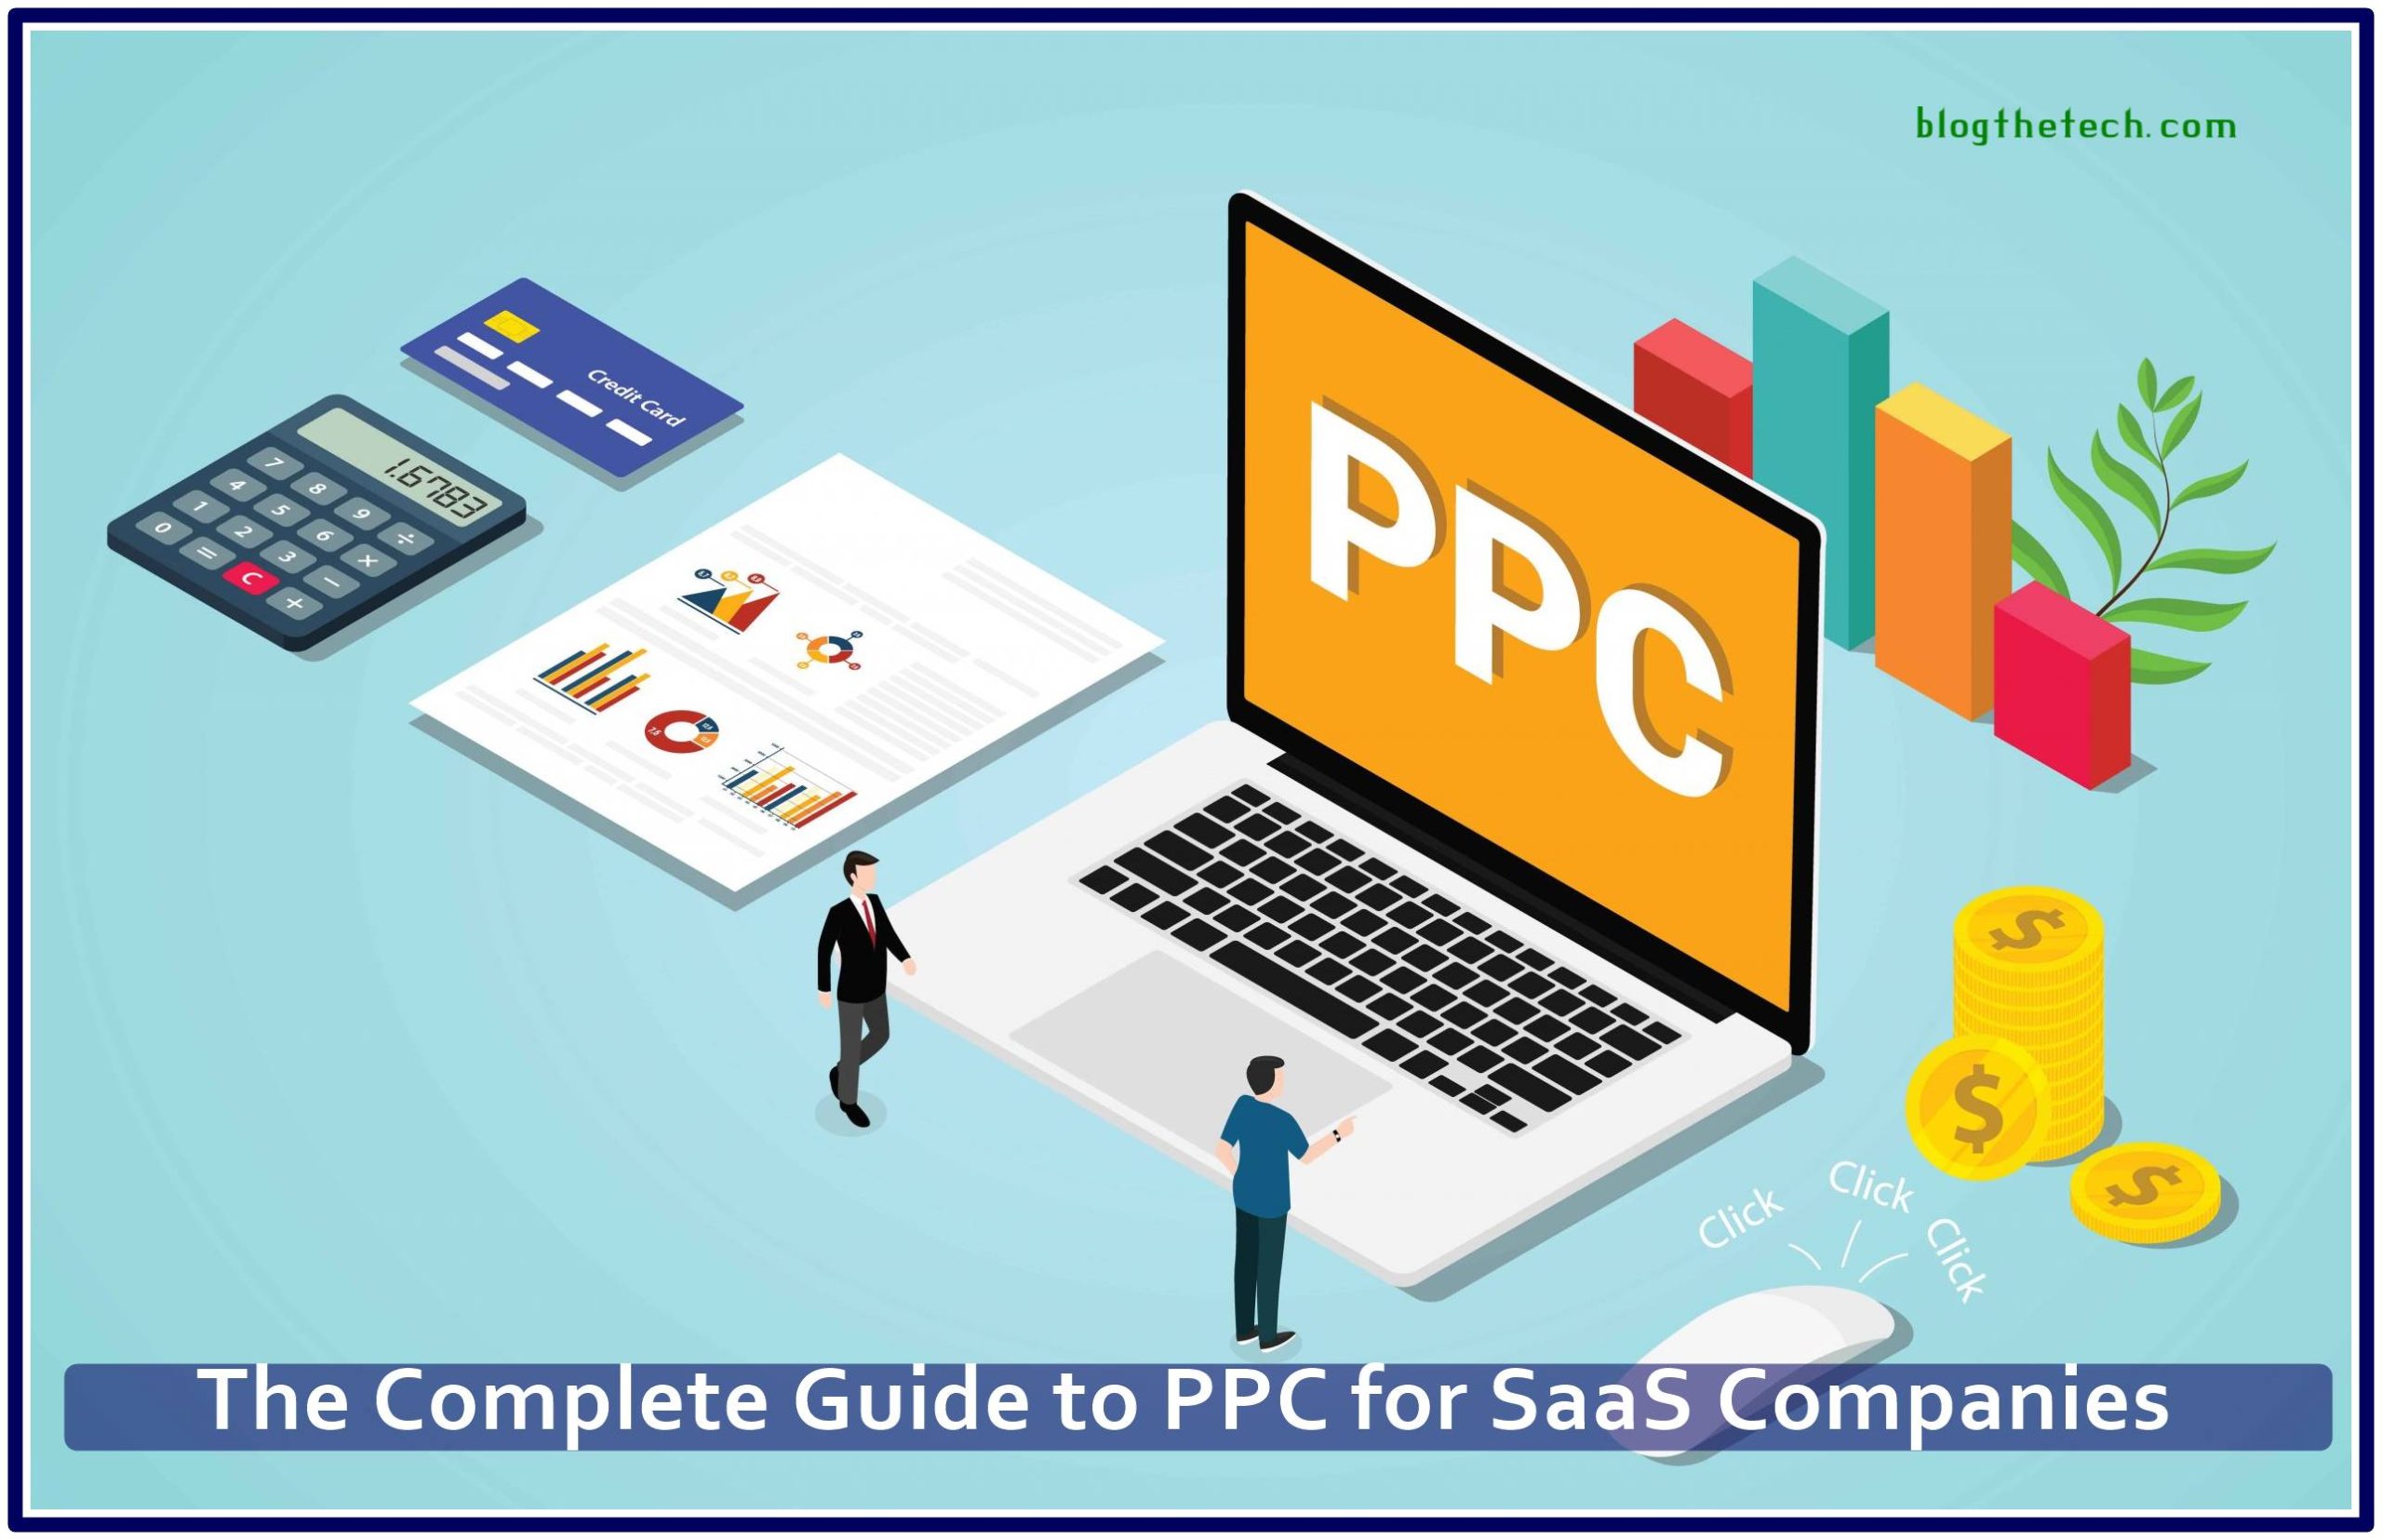 The Complete Guide to PPC for SaaS Companies